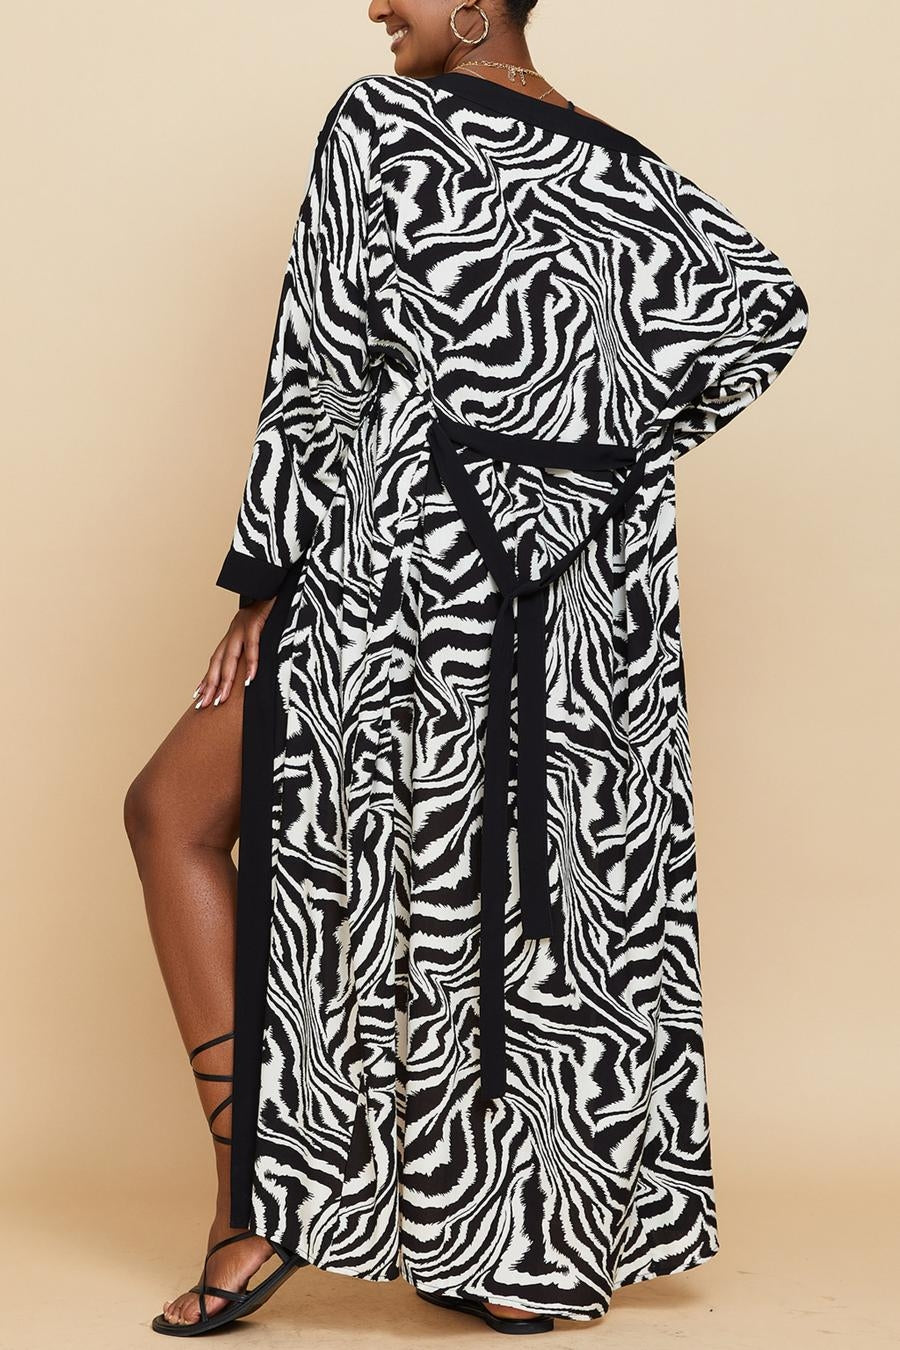 Zebra Print Kimono With Belt -Sold in Black, Blue And Yellow (One Size)